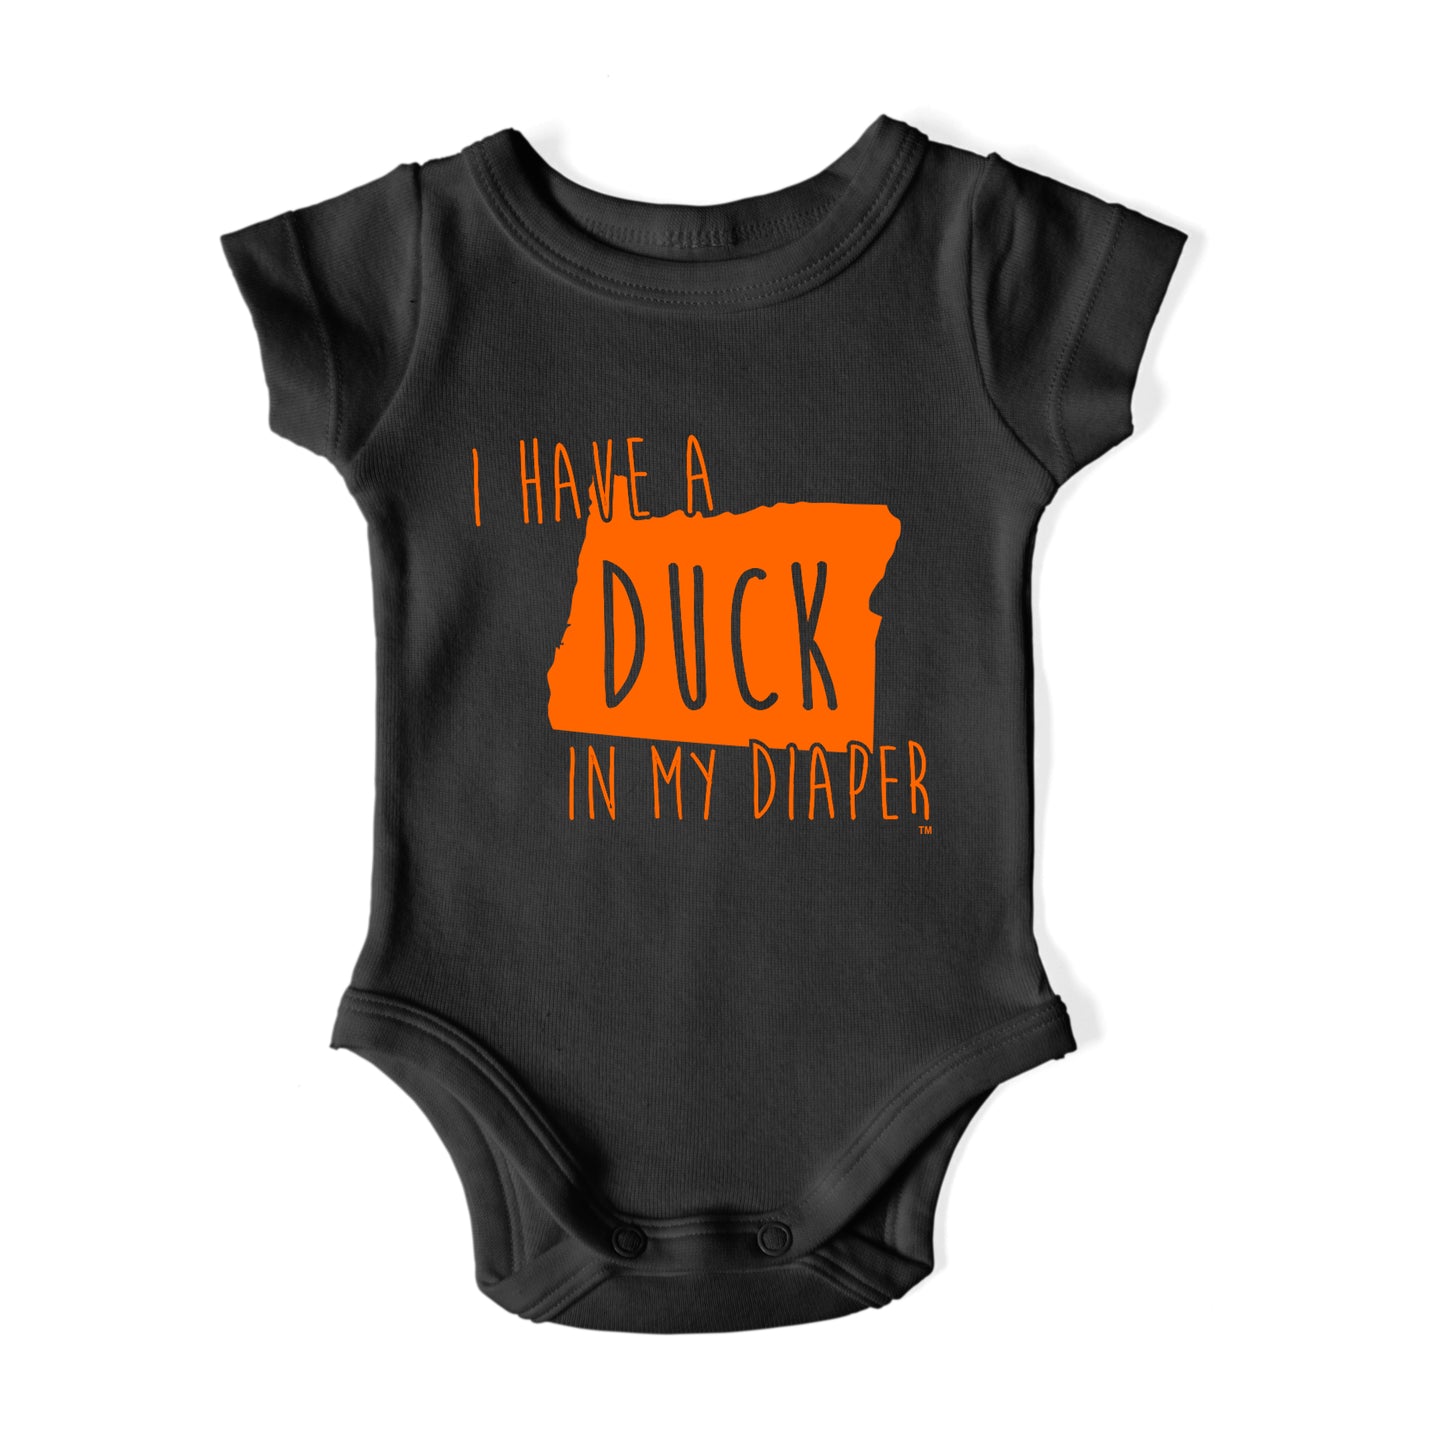 I HAVE A DUCK IN MY DIAPER Baby One Piece